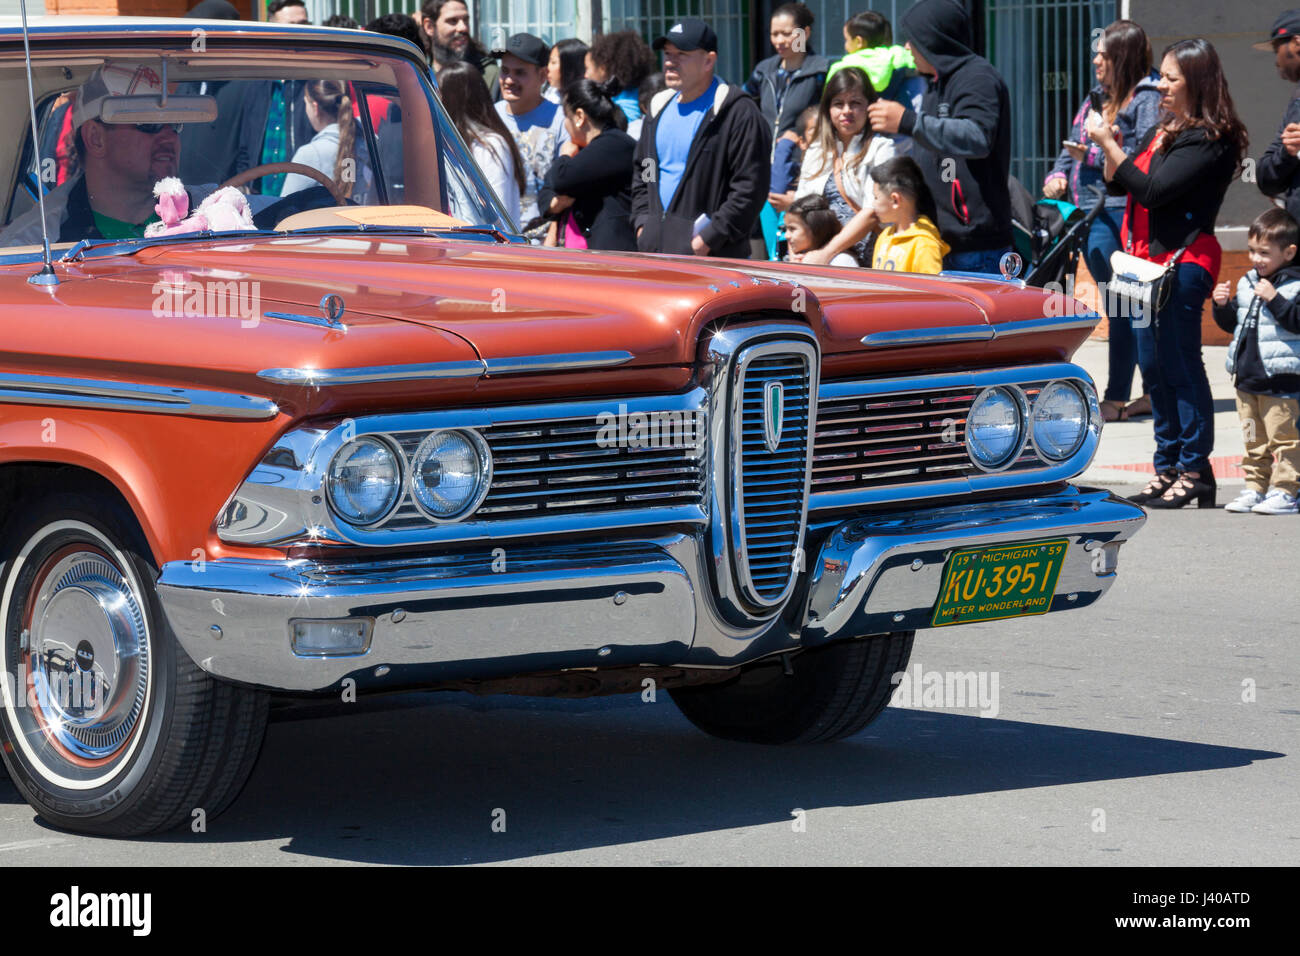 Detroit, Michigan - An Edsel in the annual Cinco de Mayo parade in the Mexican-American neighborhood of southwest Detroit. Stock Photo